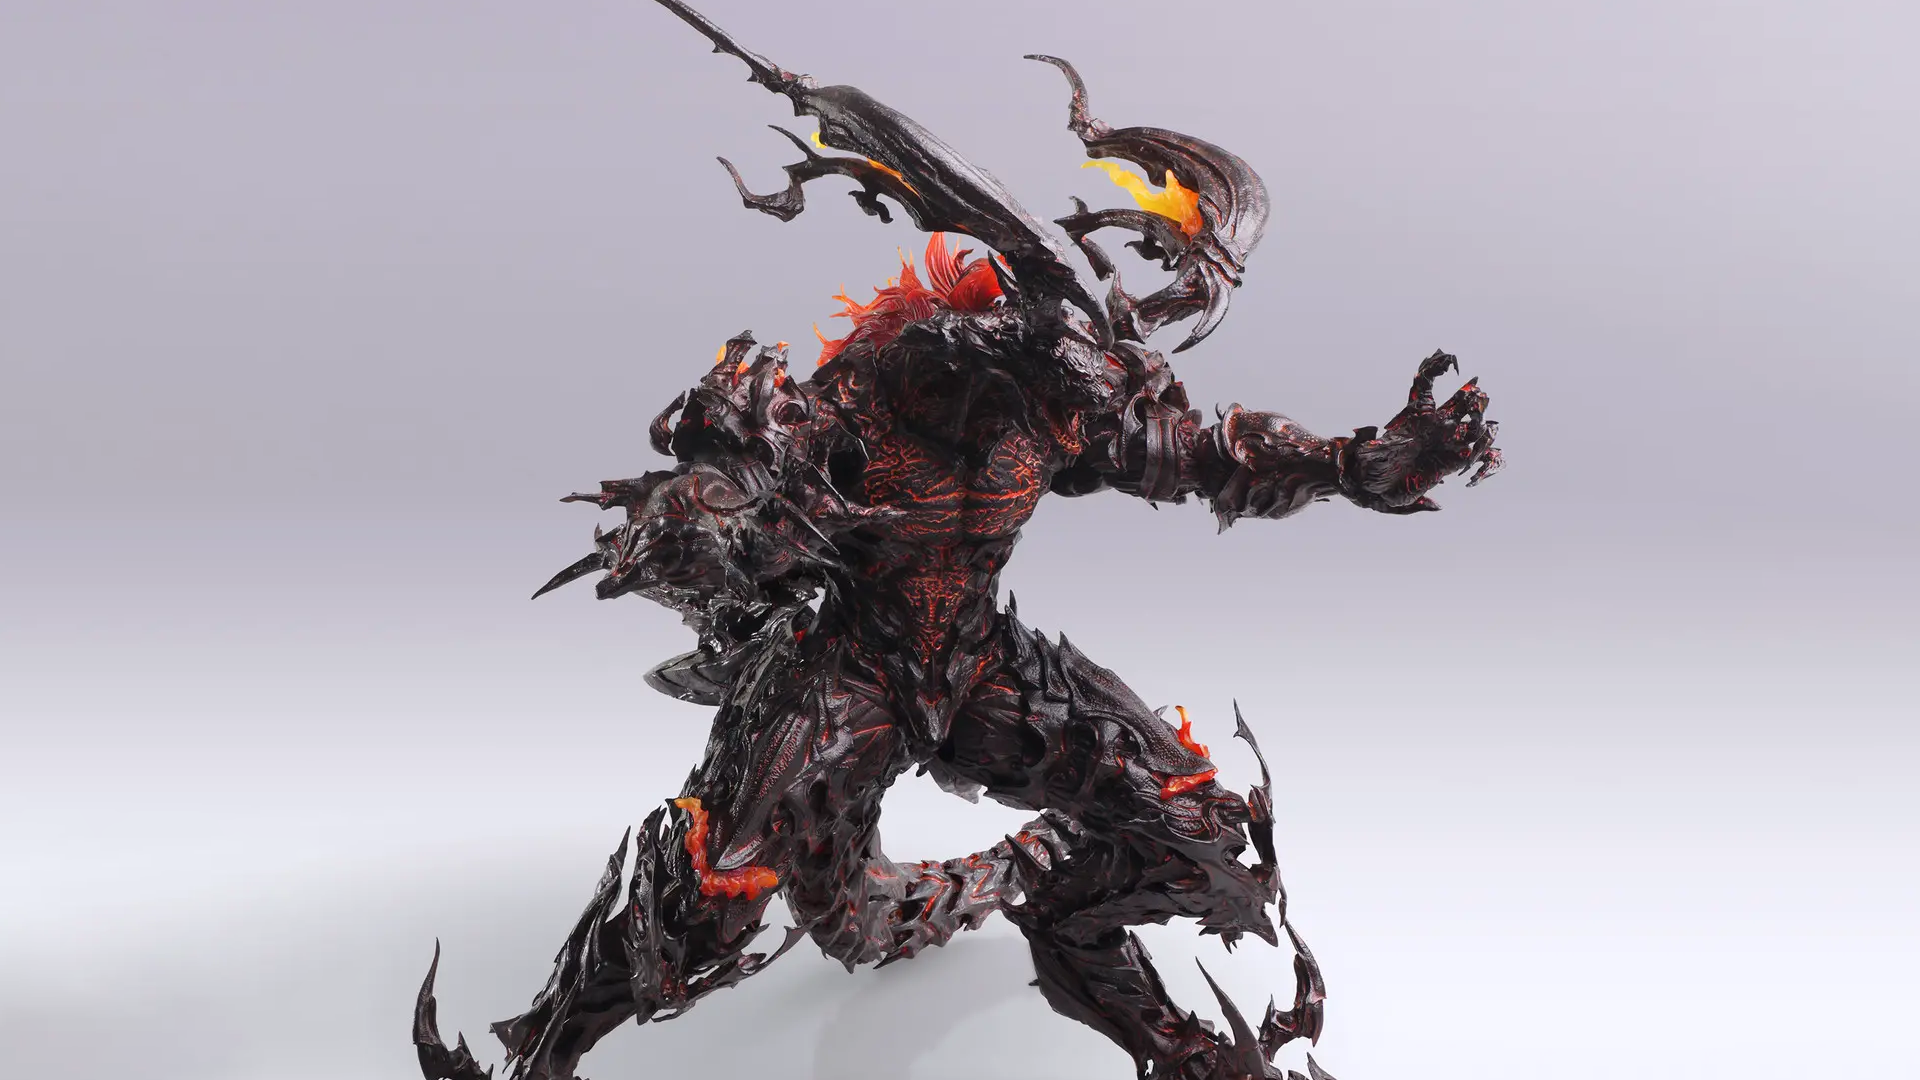 Final Fantasy XVI Opens Pre-Orders for Ifrit Bring Arts Figure for Over $300 USD; Releasing February 2025